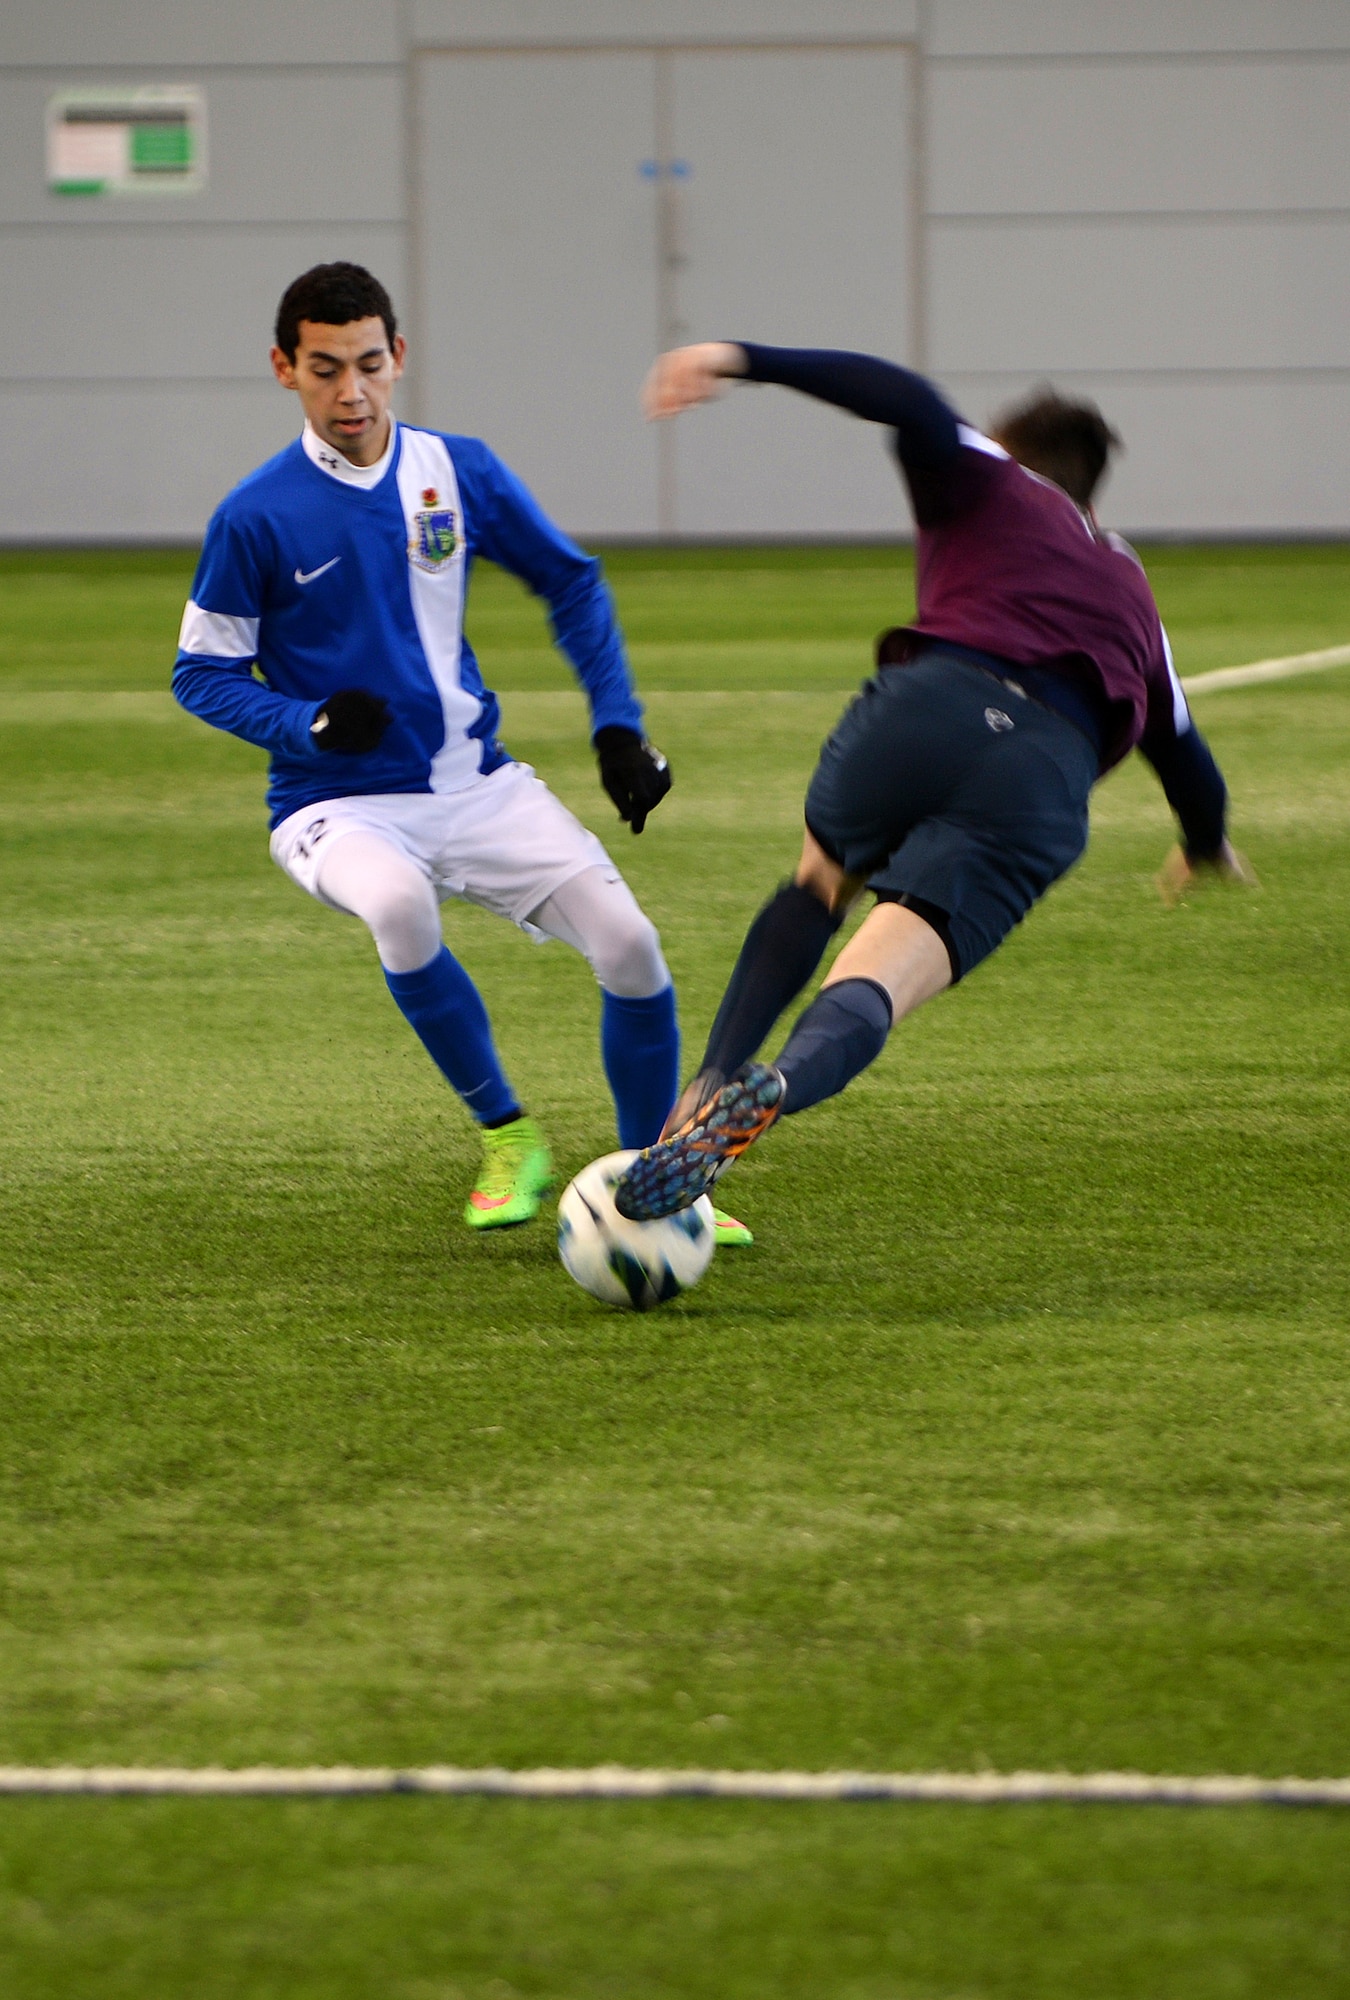 Kyle Freaney, a forward for the Liberty Football Club, takes control of the ball during a match against the world-ranked England Cerebral Palsy team at St. George’s Park, England, Jan. 25, 2015. The England CP team is currently training for the 2015 CP World Cup, which will be hosted by England at St. George’s Park. (U.S. Air Force photo by Staff Sgt. Emerson Nuñez/Released)